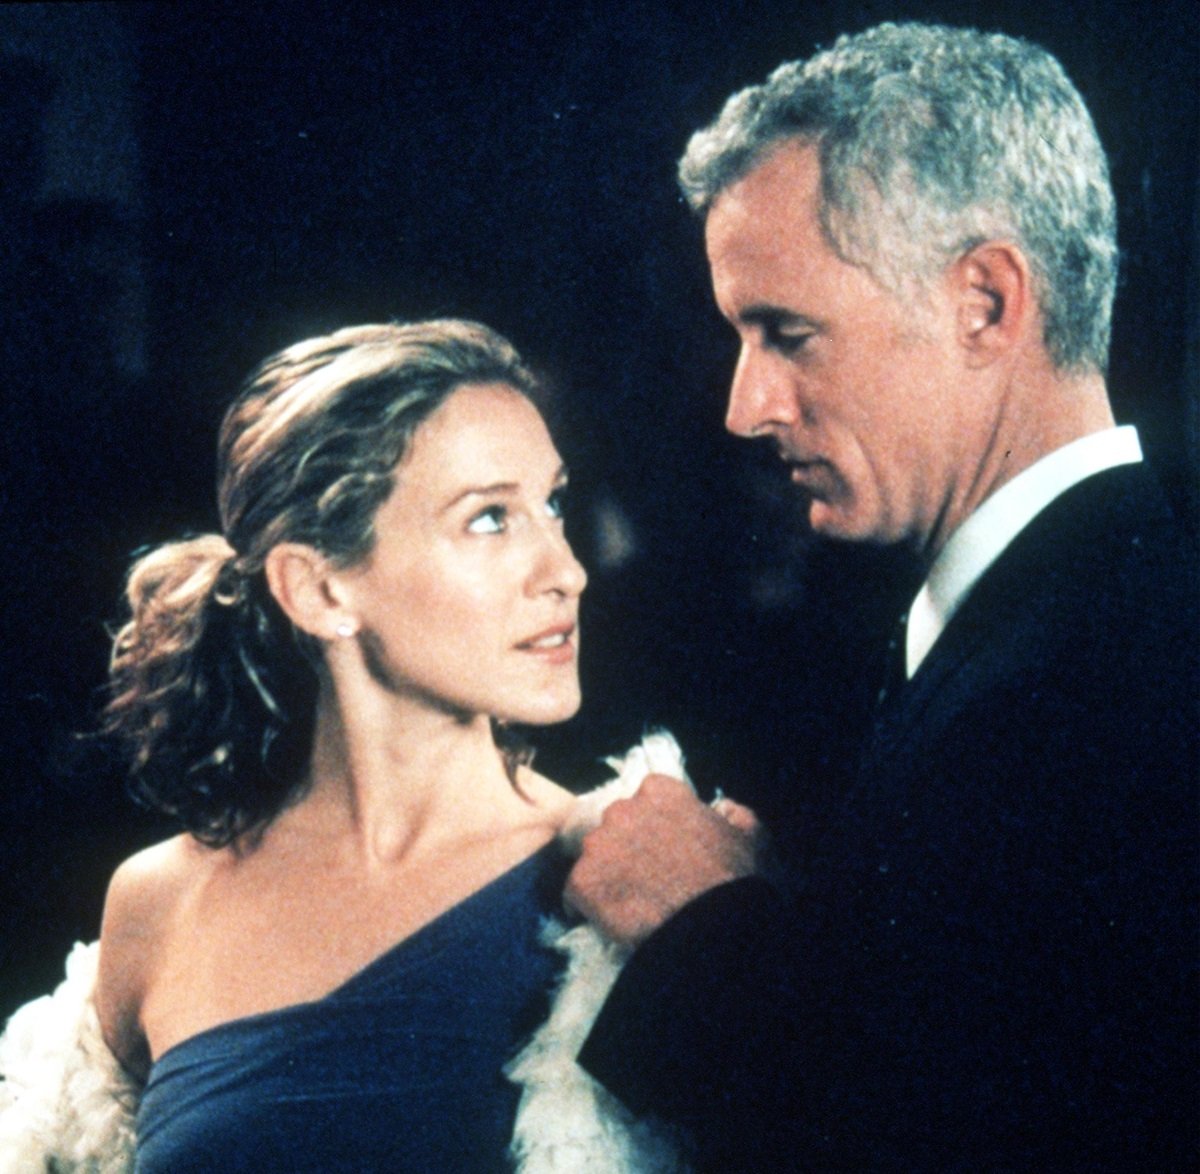 Sarah Jessica Parker (Carrie) and John Slattery (Bill) act in a scene from the HBO television series "Sex and the City" third season, episode "Where There's Smoke".